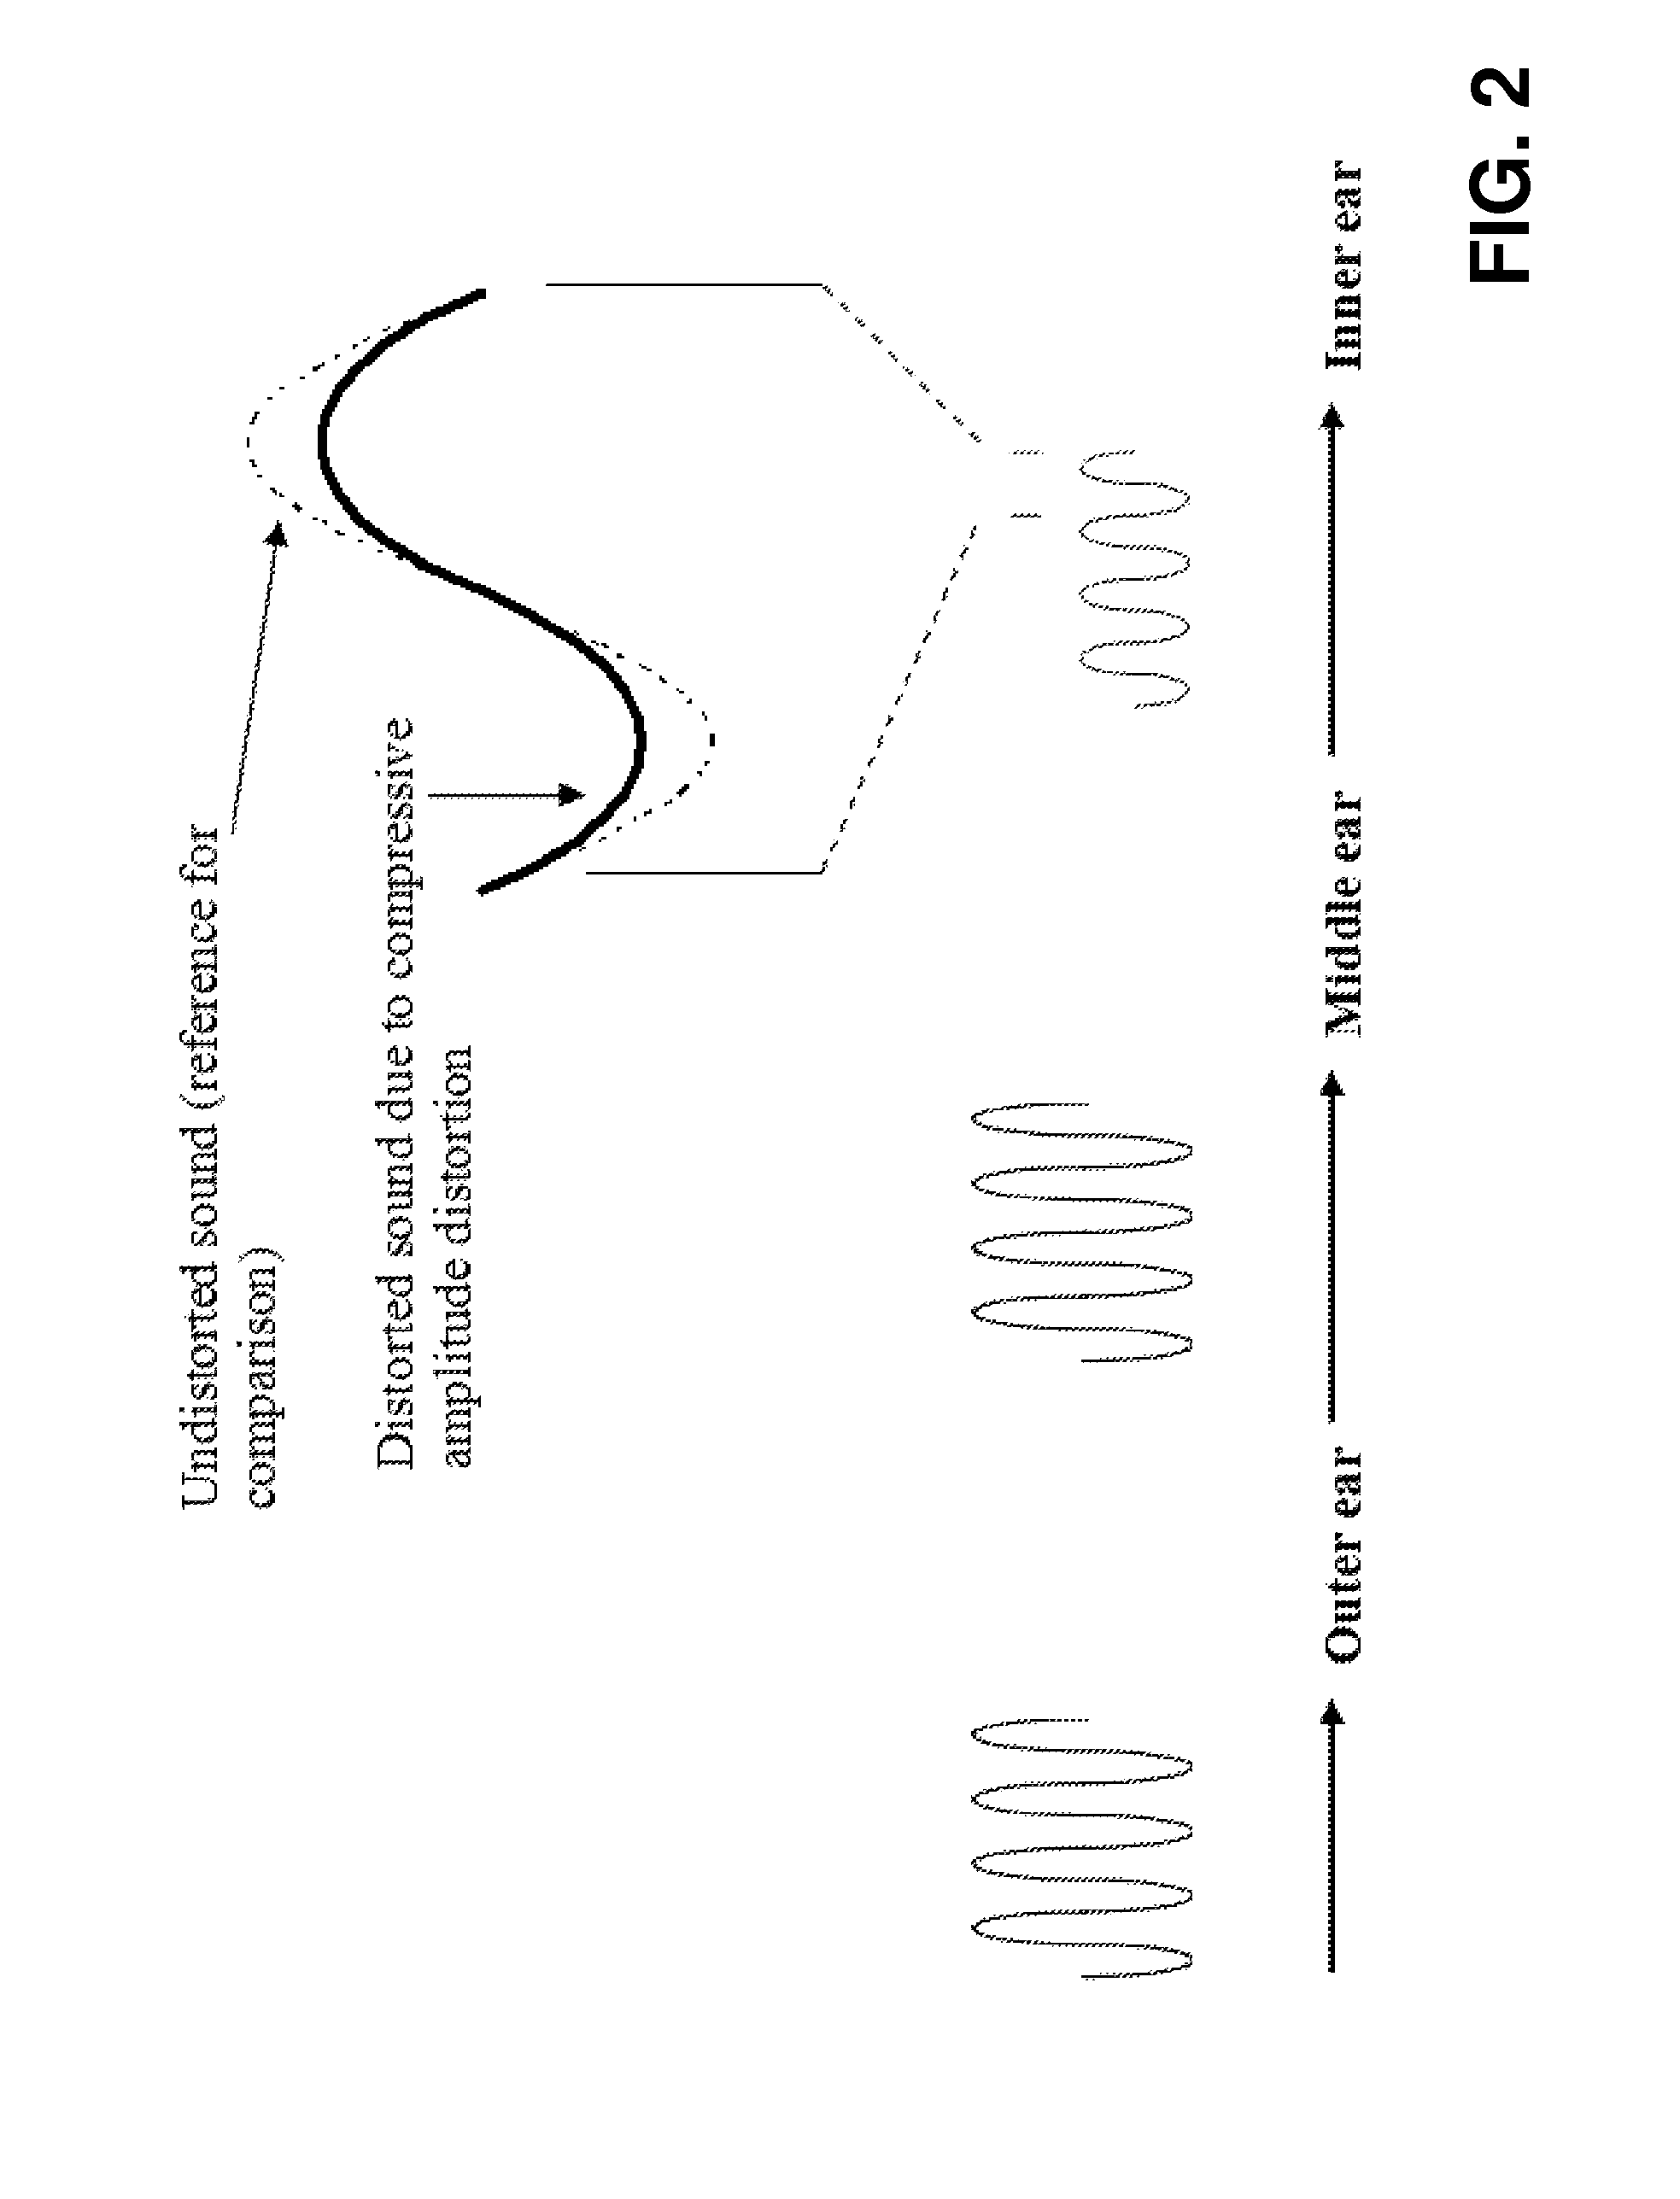 Perception enhancement for low-frequency sound components